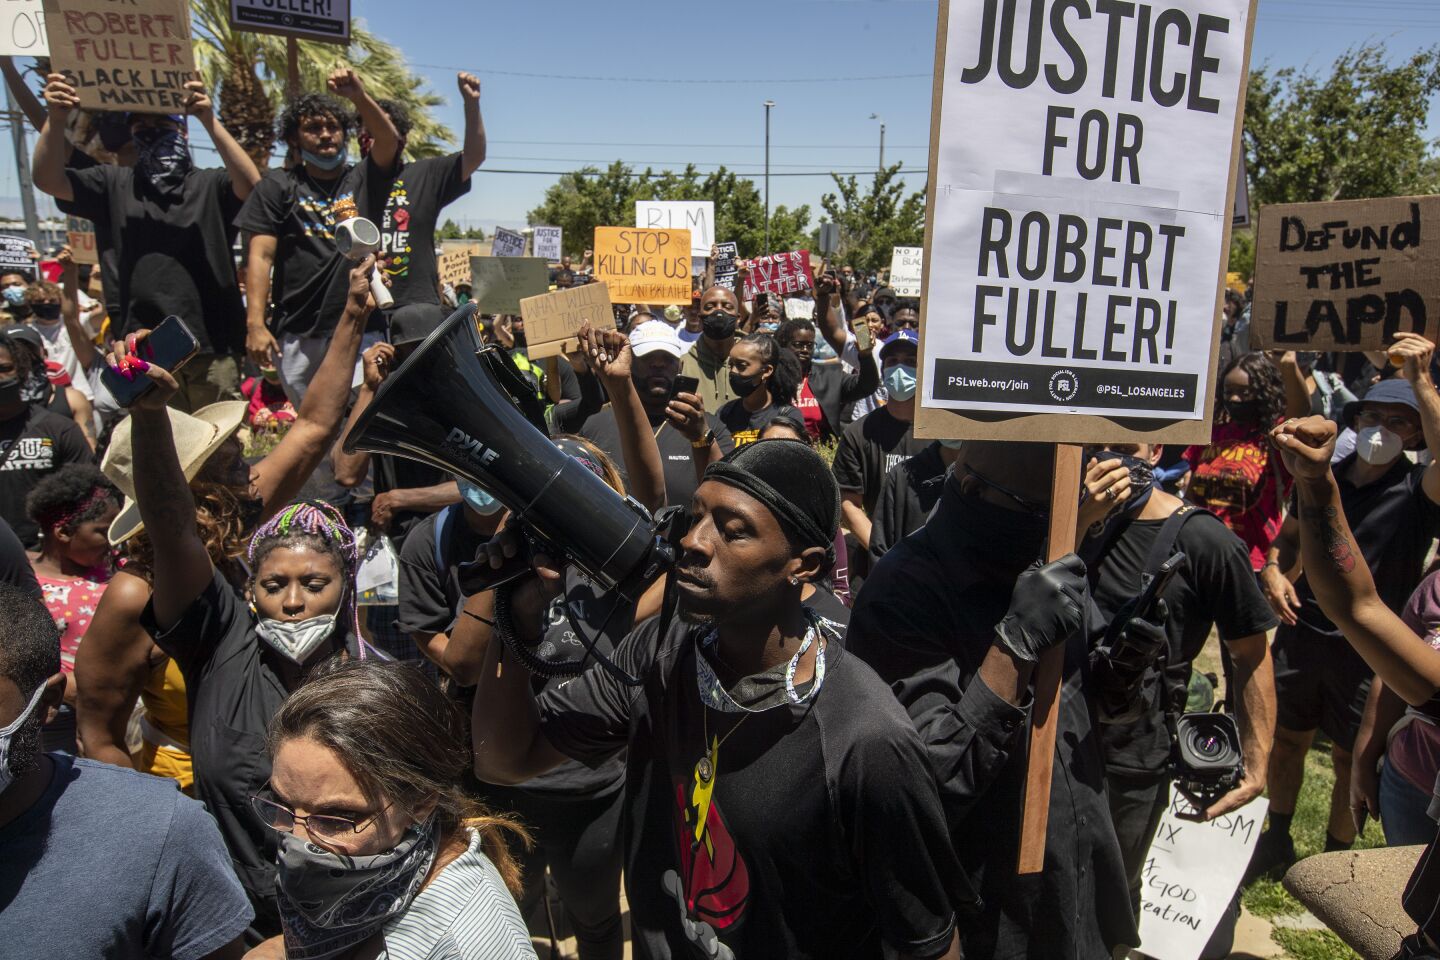 Thousands protest in Palmdale over the death of Robert Fuller